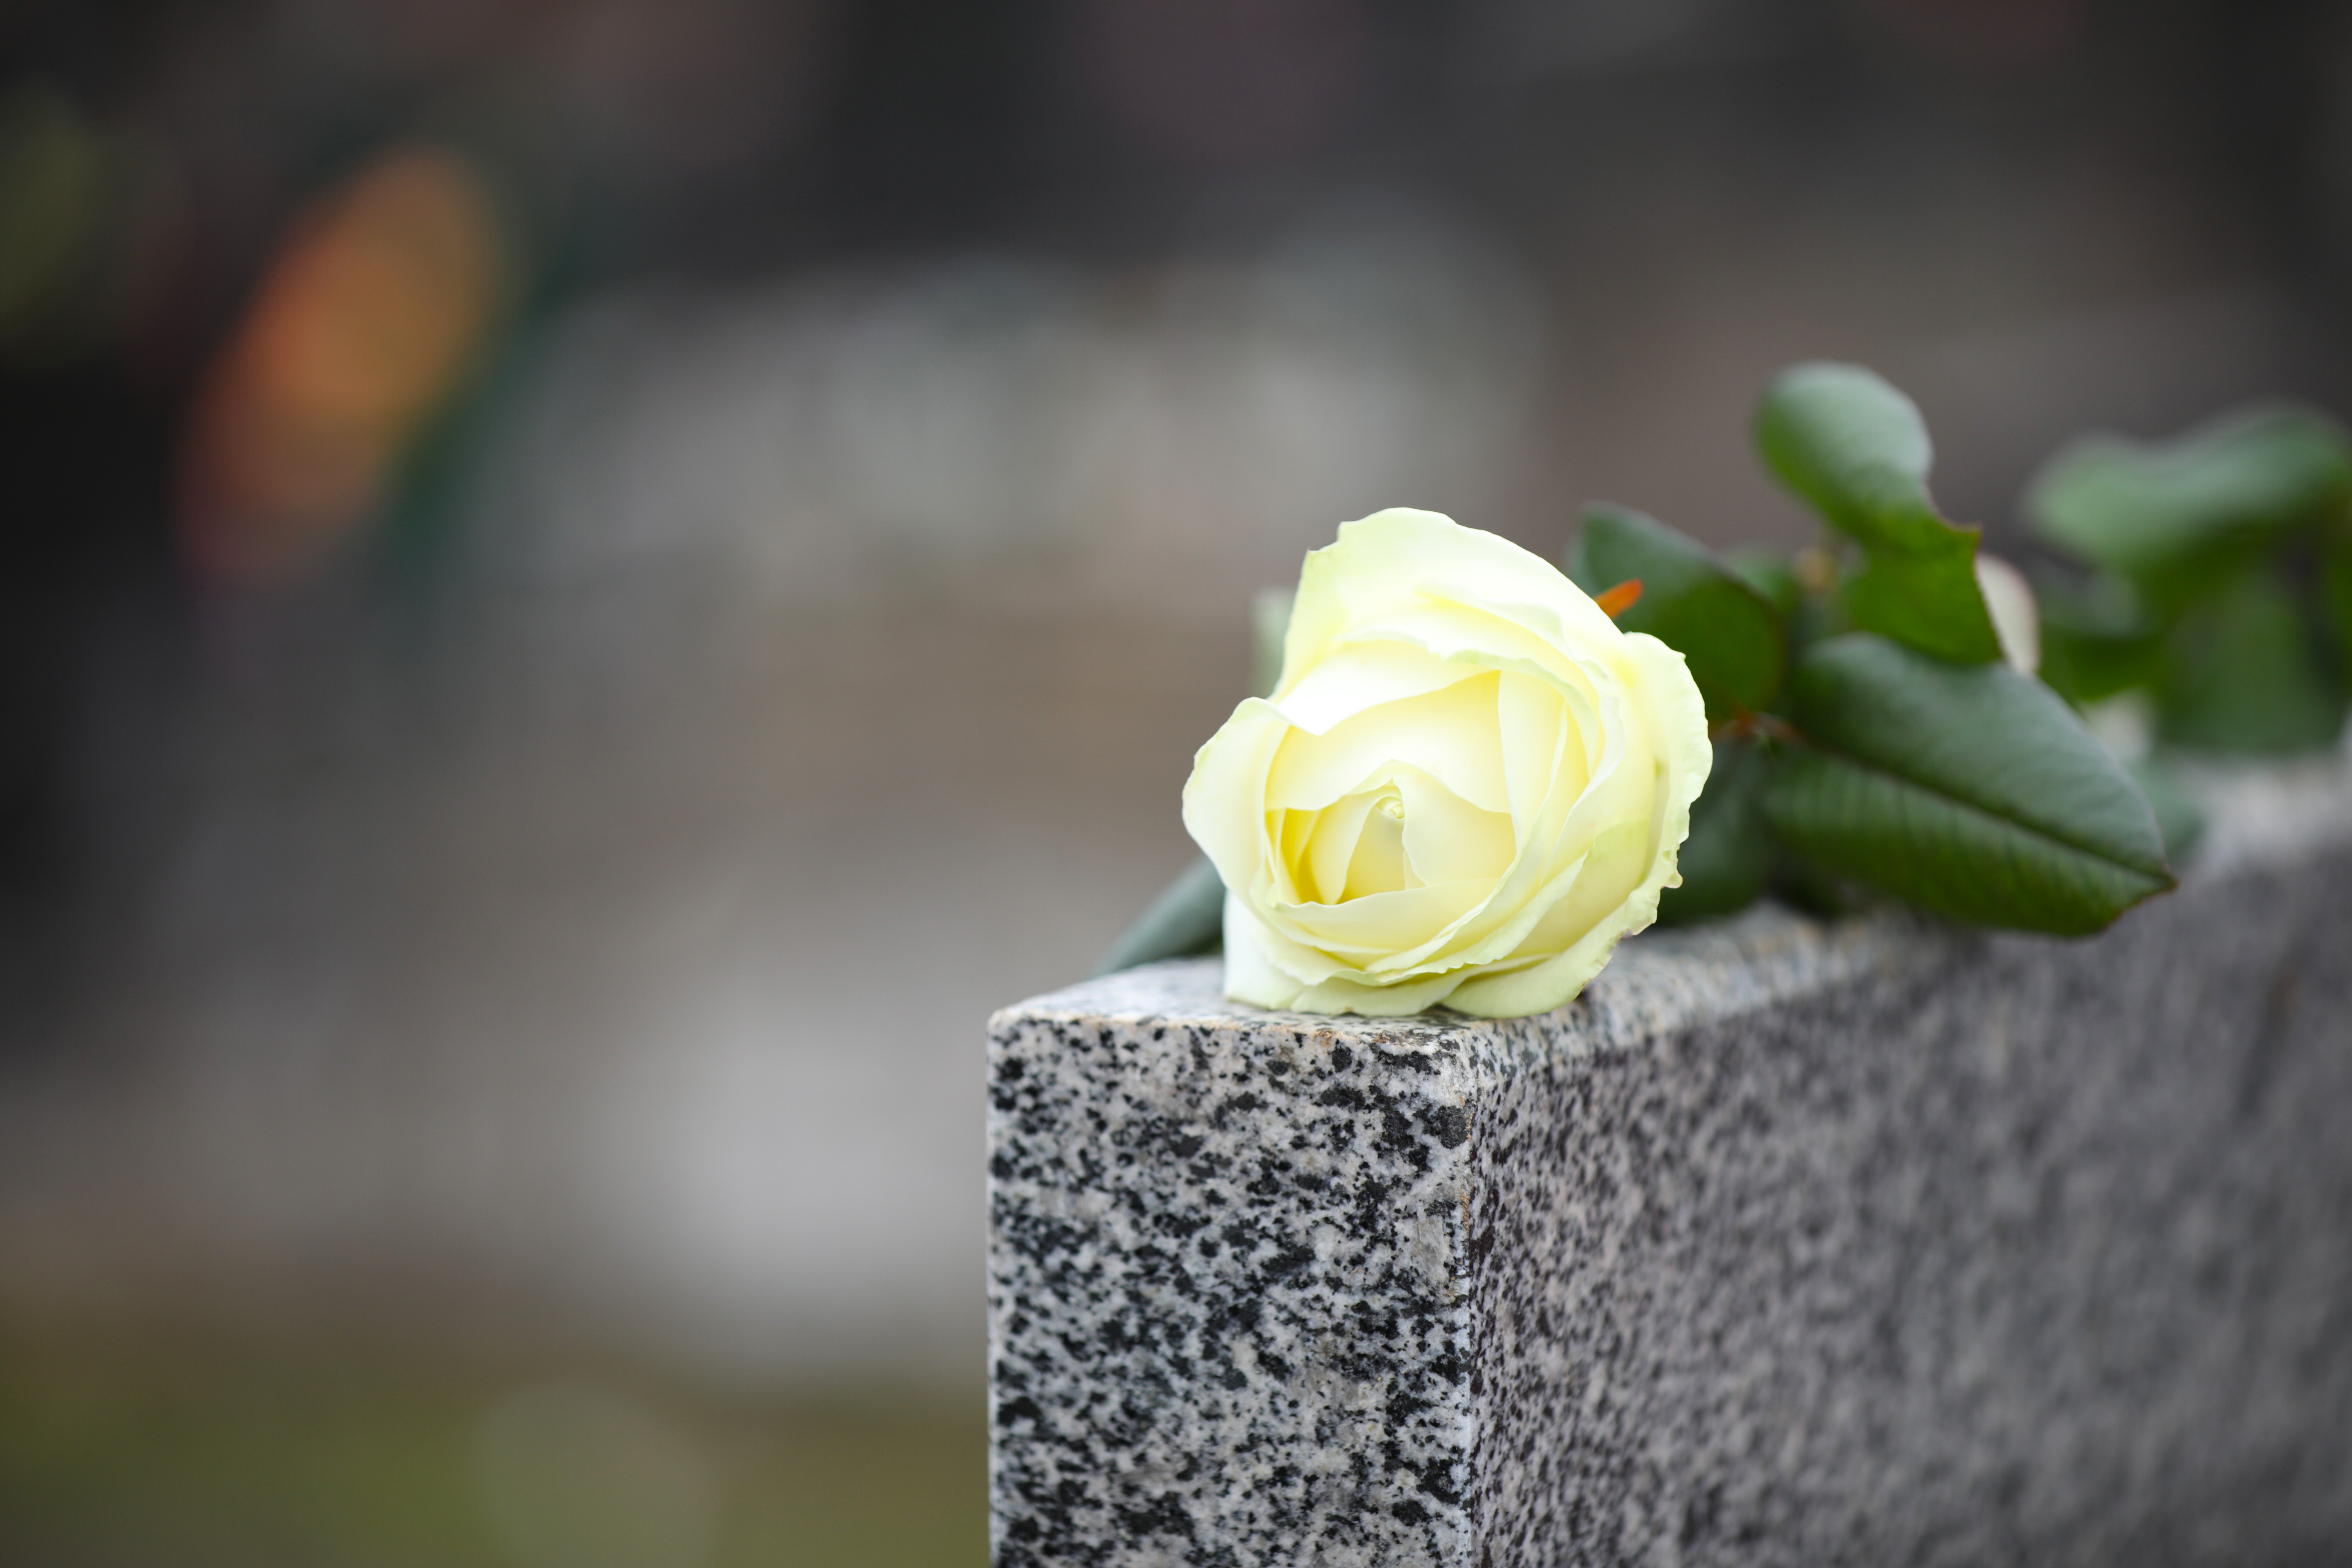 White rose on grey granite tombstone outdoors. | Source: Shutterstock